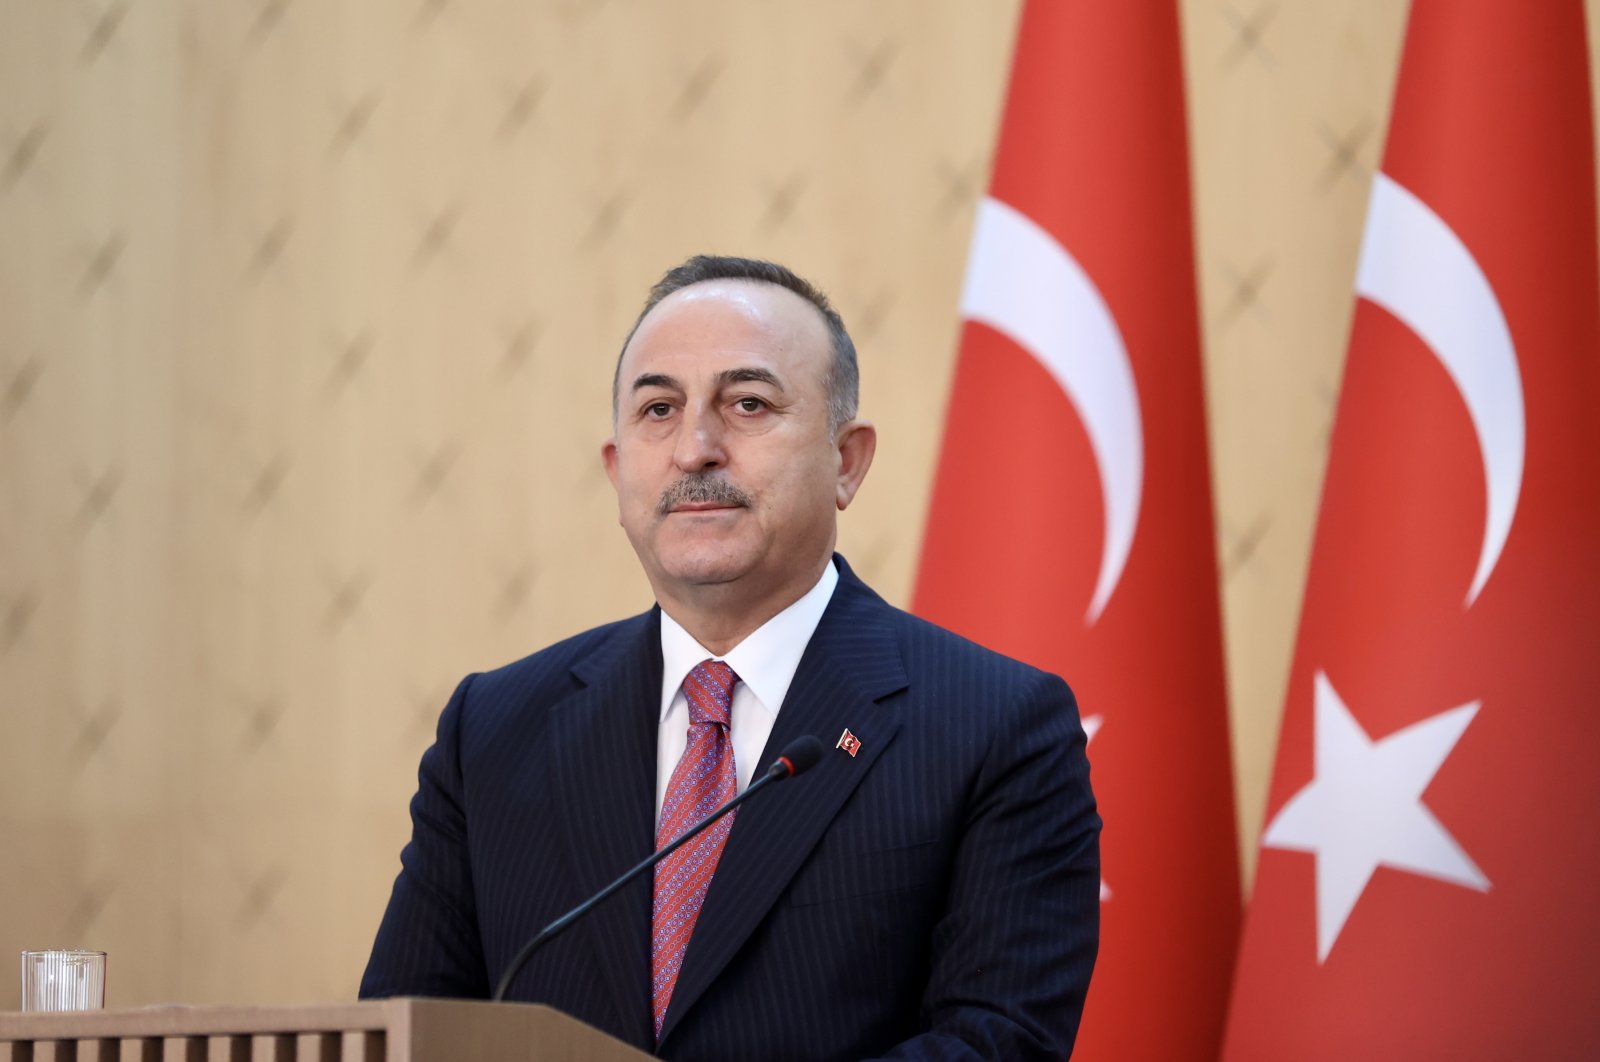 Foreign Minister Mevlüt Çavuşoğlu speaks at a joint news conference with his Azerbaijani counterpart in Baku, Azerbaijan, March 5, 2022. (AA File Photo)